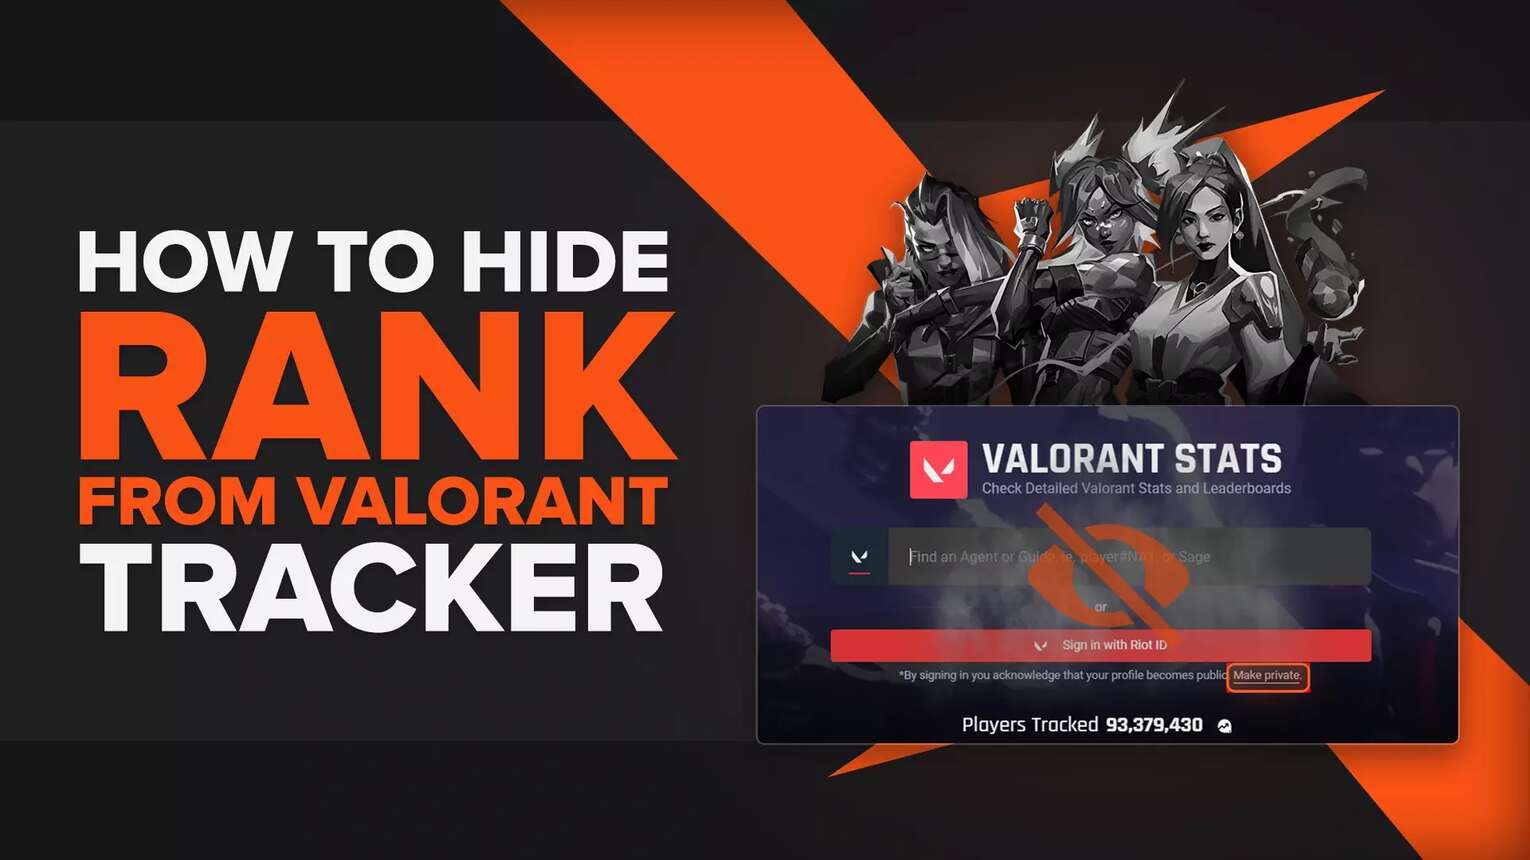 Can't login with my riot account - Valorant - Tracker Network